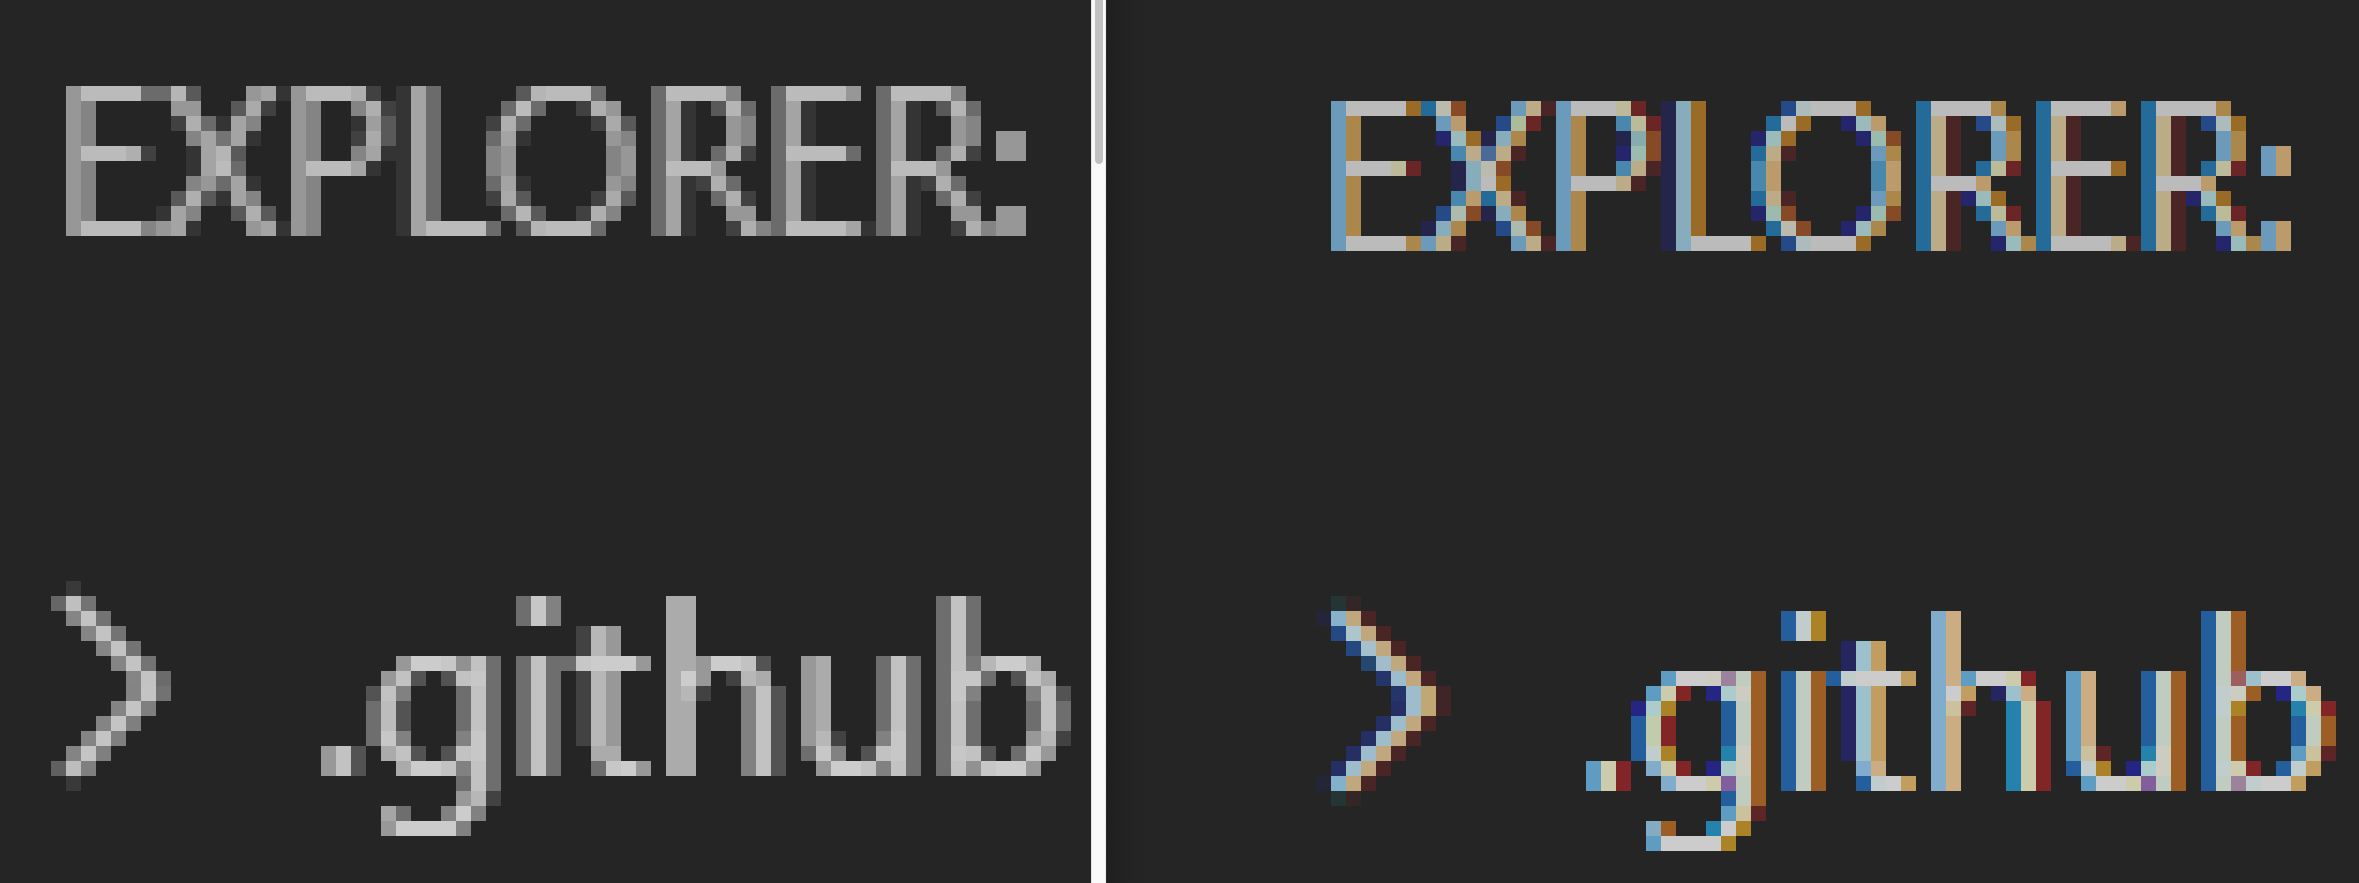 Improved font rendering before and after